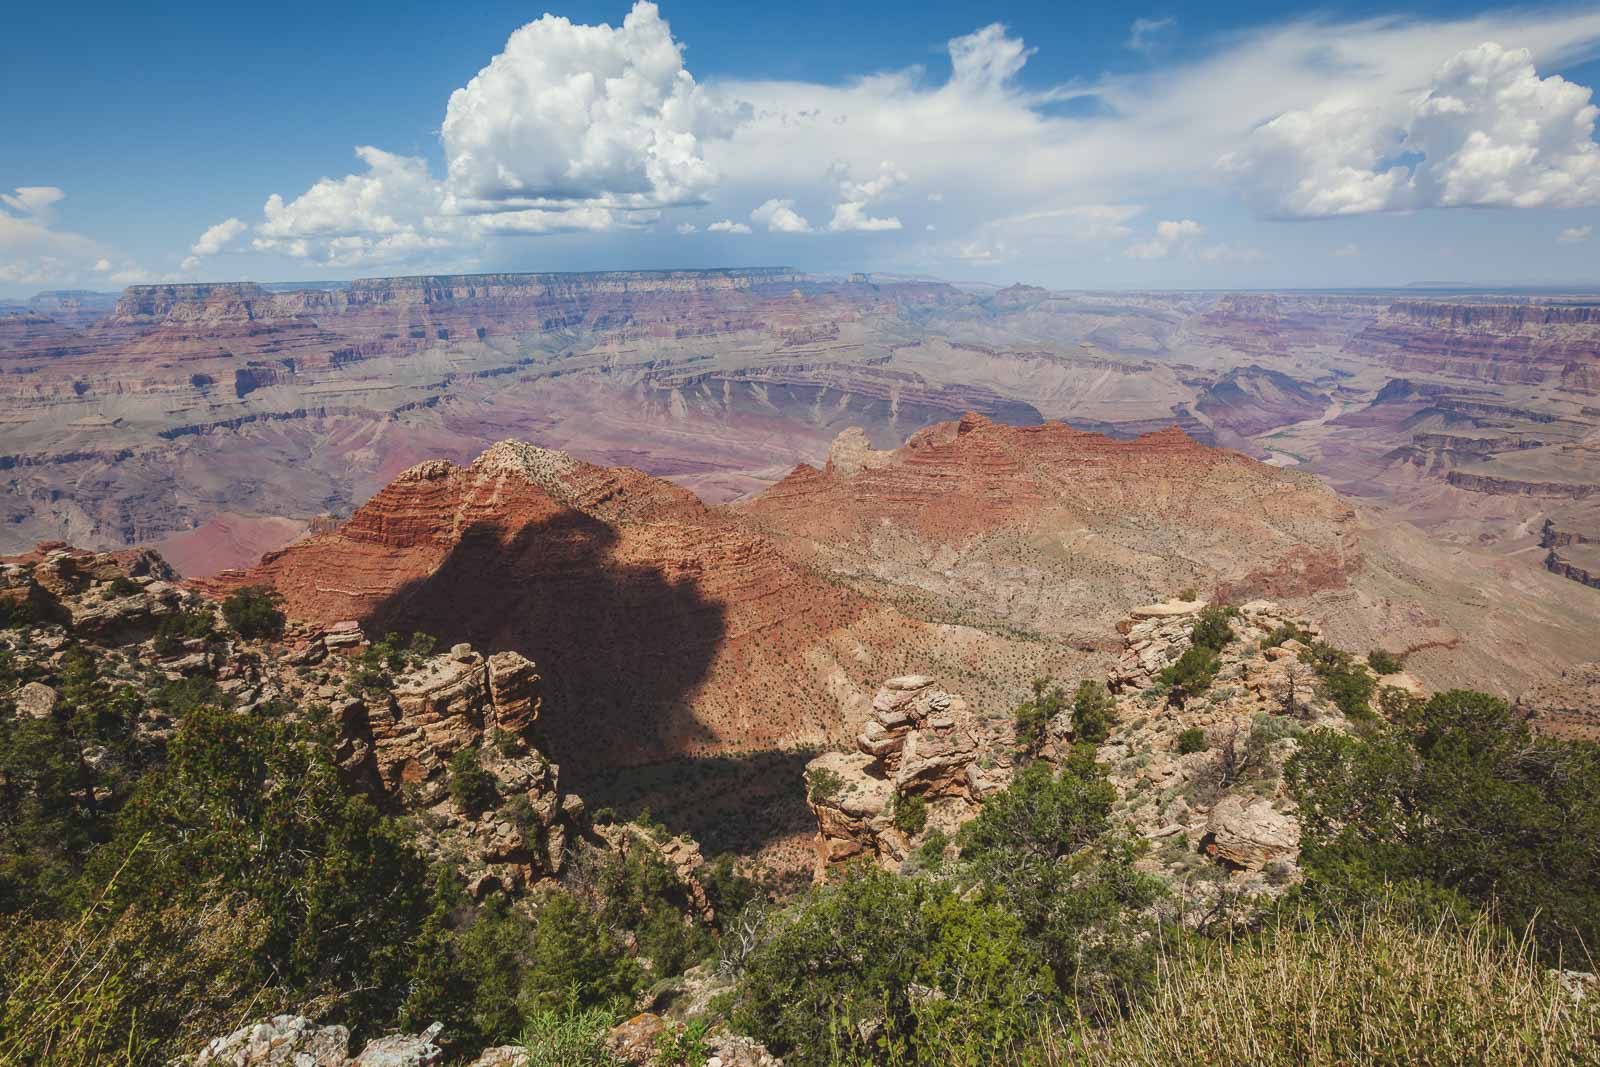 Where to stay in the Grand Canyon